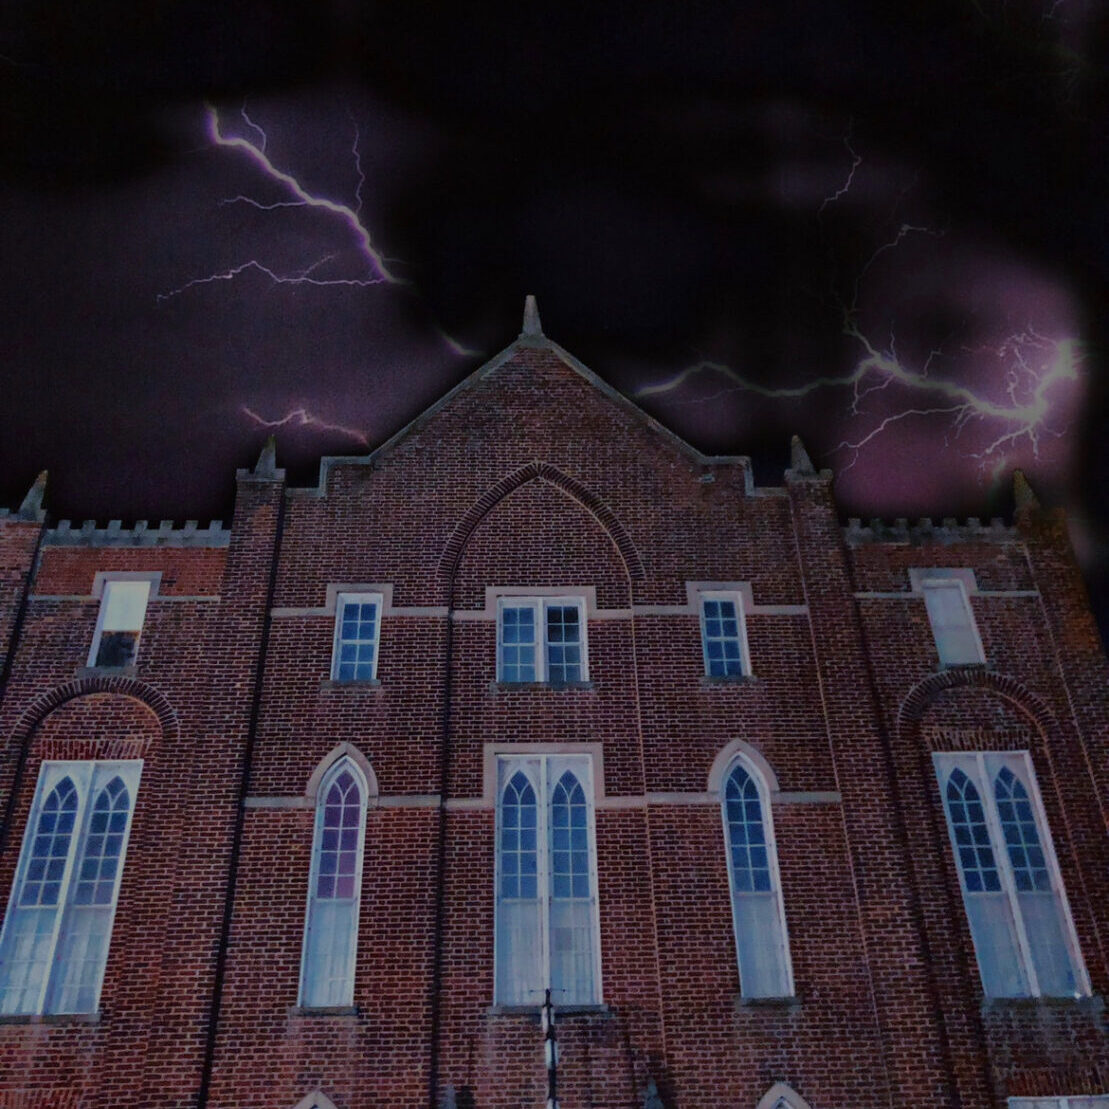 A spooky building in a storm